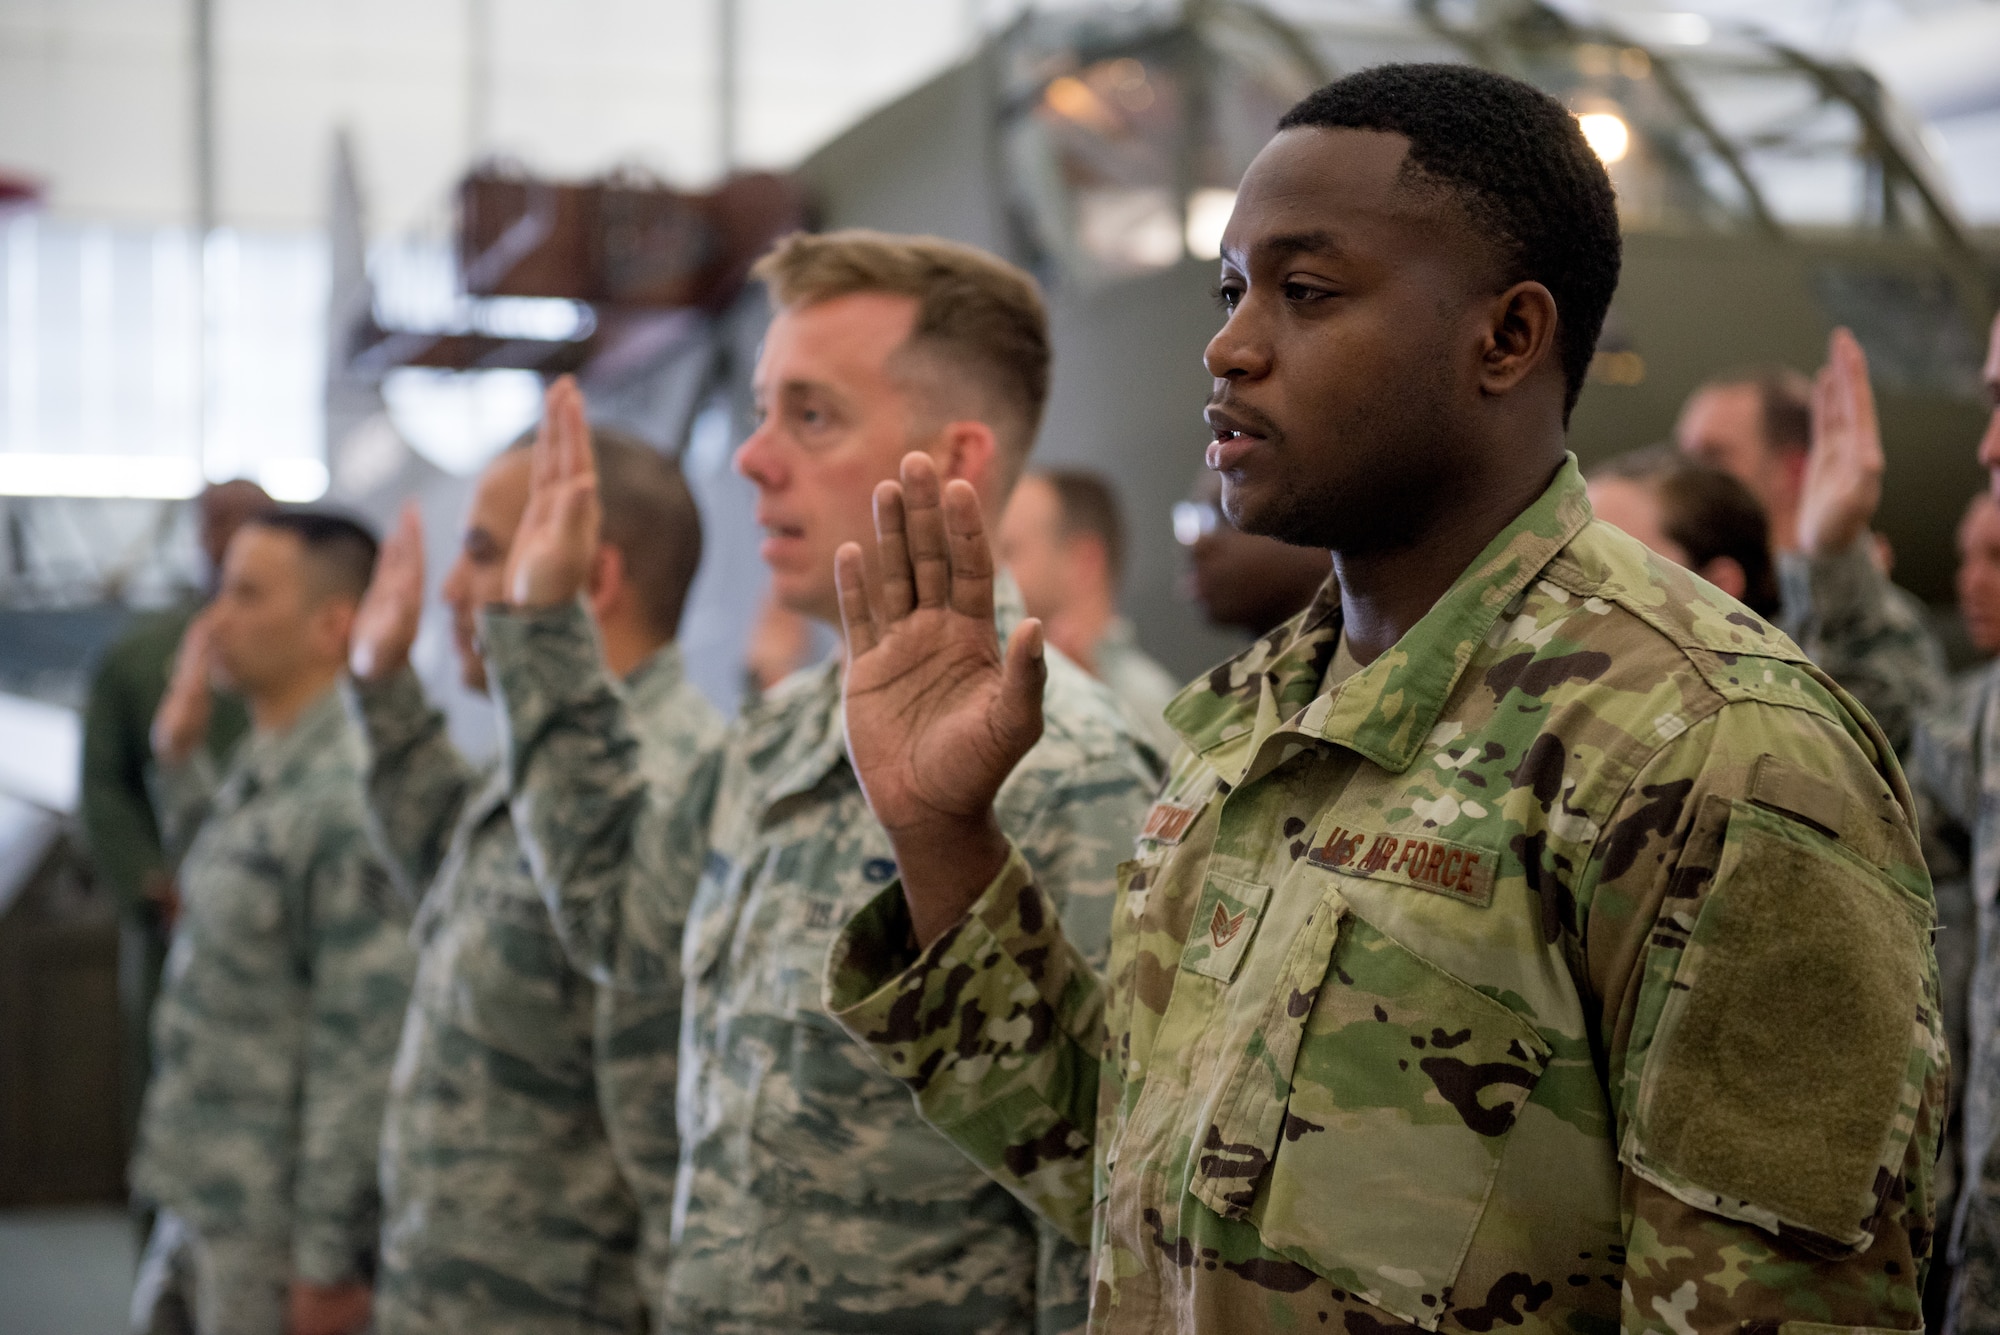 Airmen from the 512th Airlift Wing raise their right hands during a non-commissioned officer induction ceremony held at the Air Mobility Command Museum in Dover, Del., May 19, 2019. Seventy-seven newly promoted staff sergeants were charged with new responsibilities as they accepted the role within their new rank. (U.S. Air Force photo by Capt. Katie Spencer)